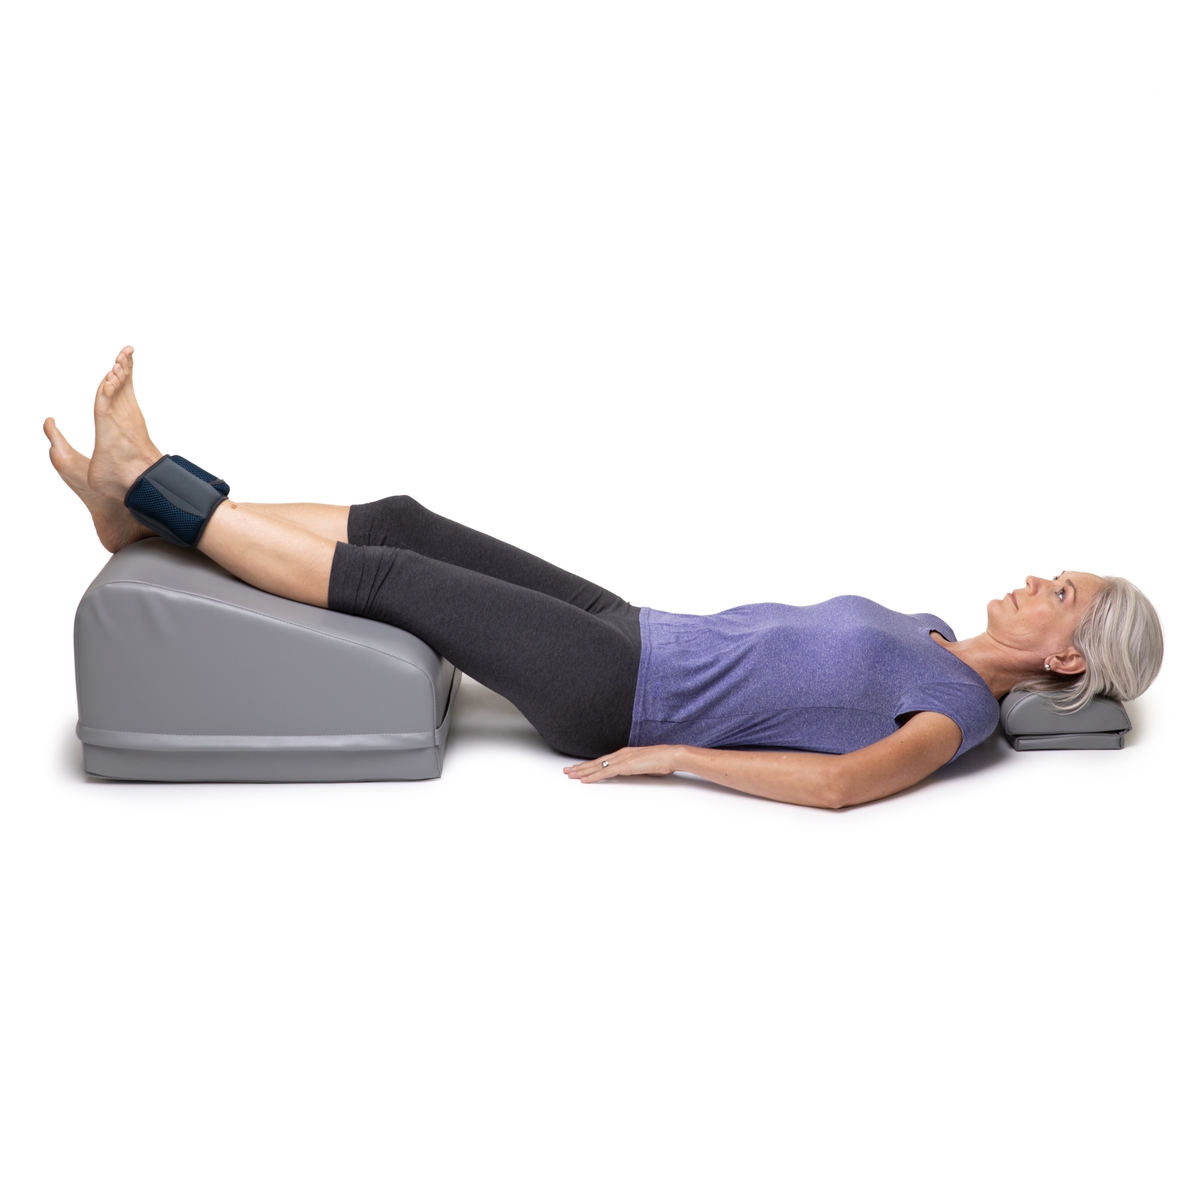 leg positioning pillow - Well-Being Pelvic Physical Therapy